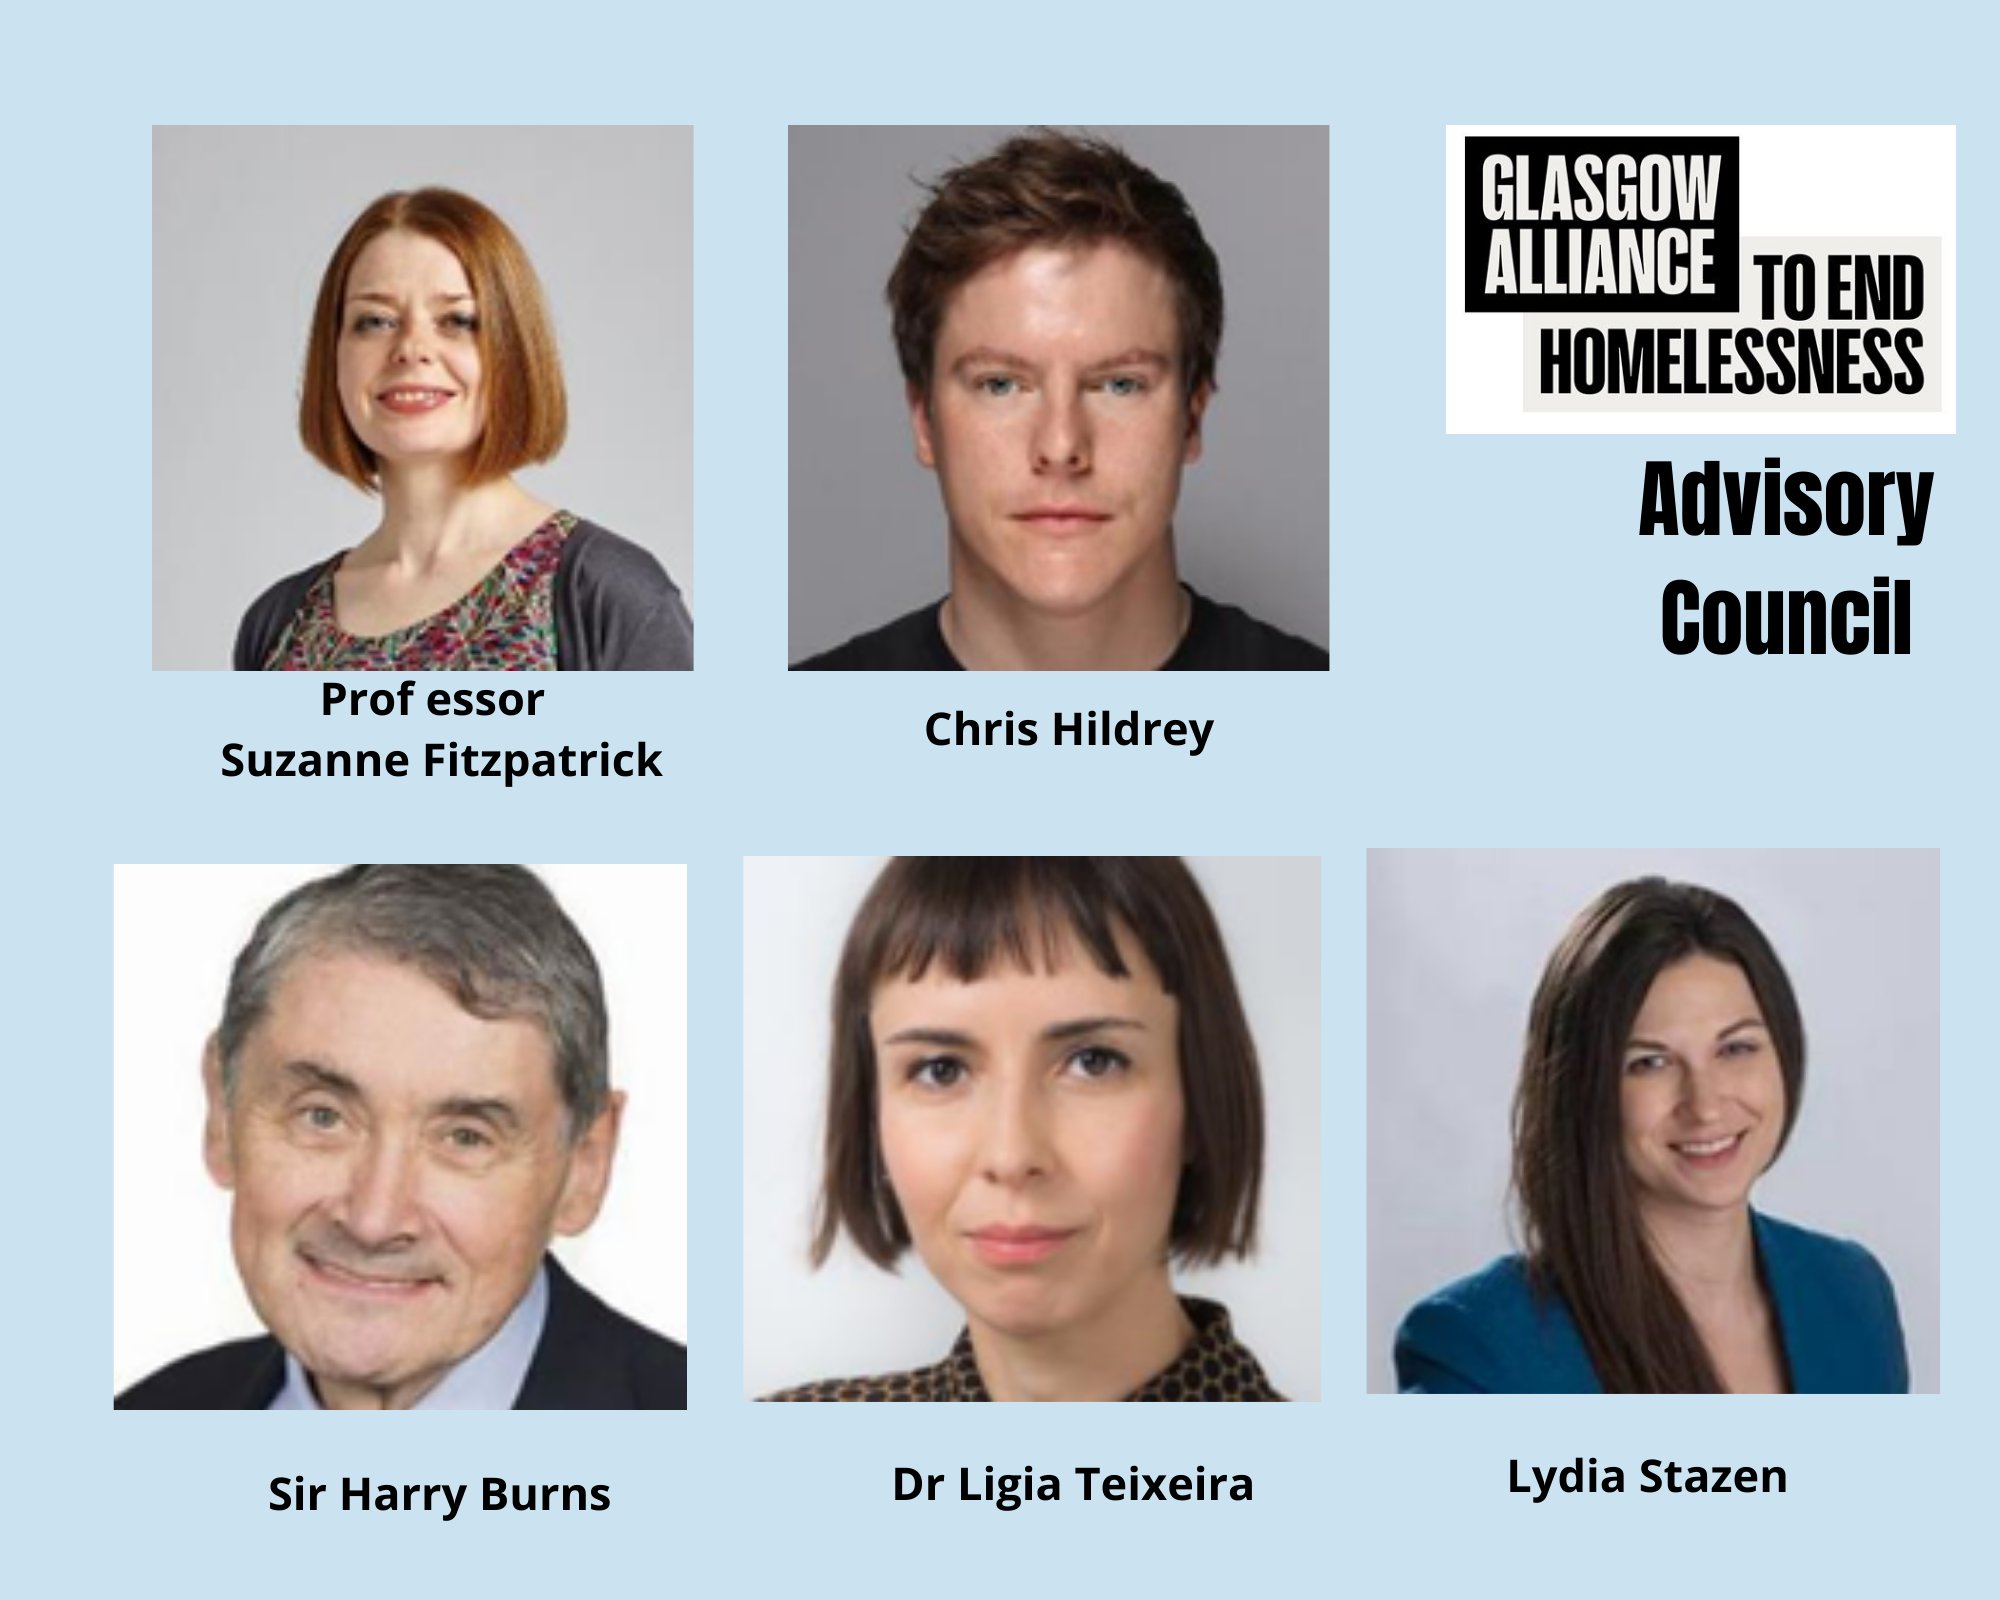 International experts unite to help end homelessness in Glasgow